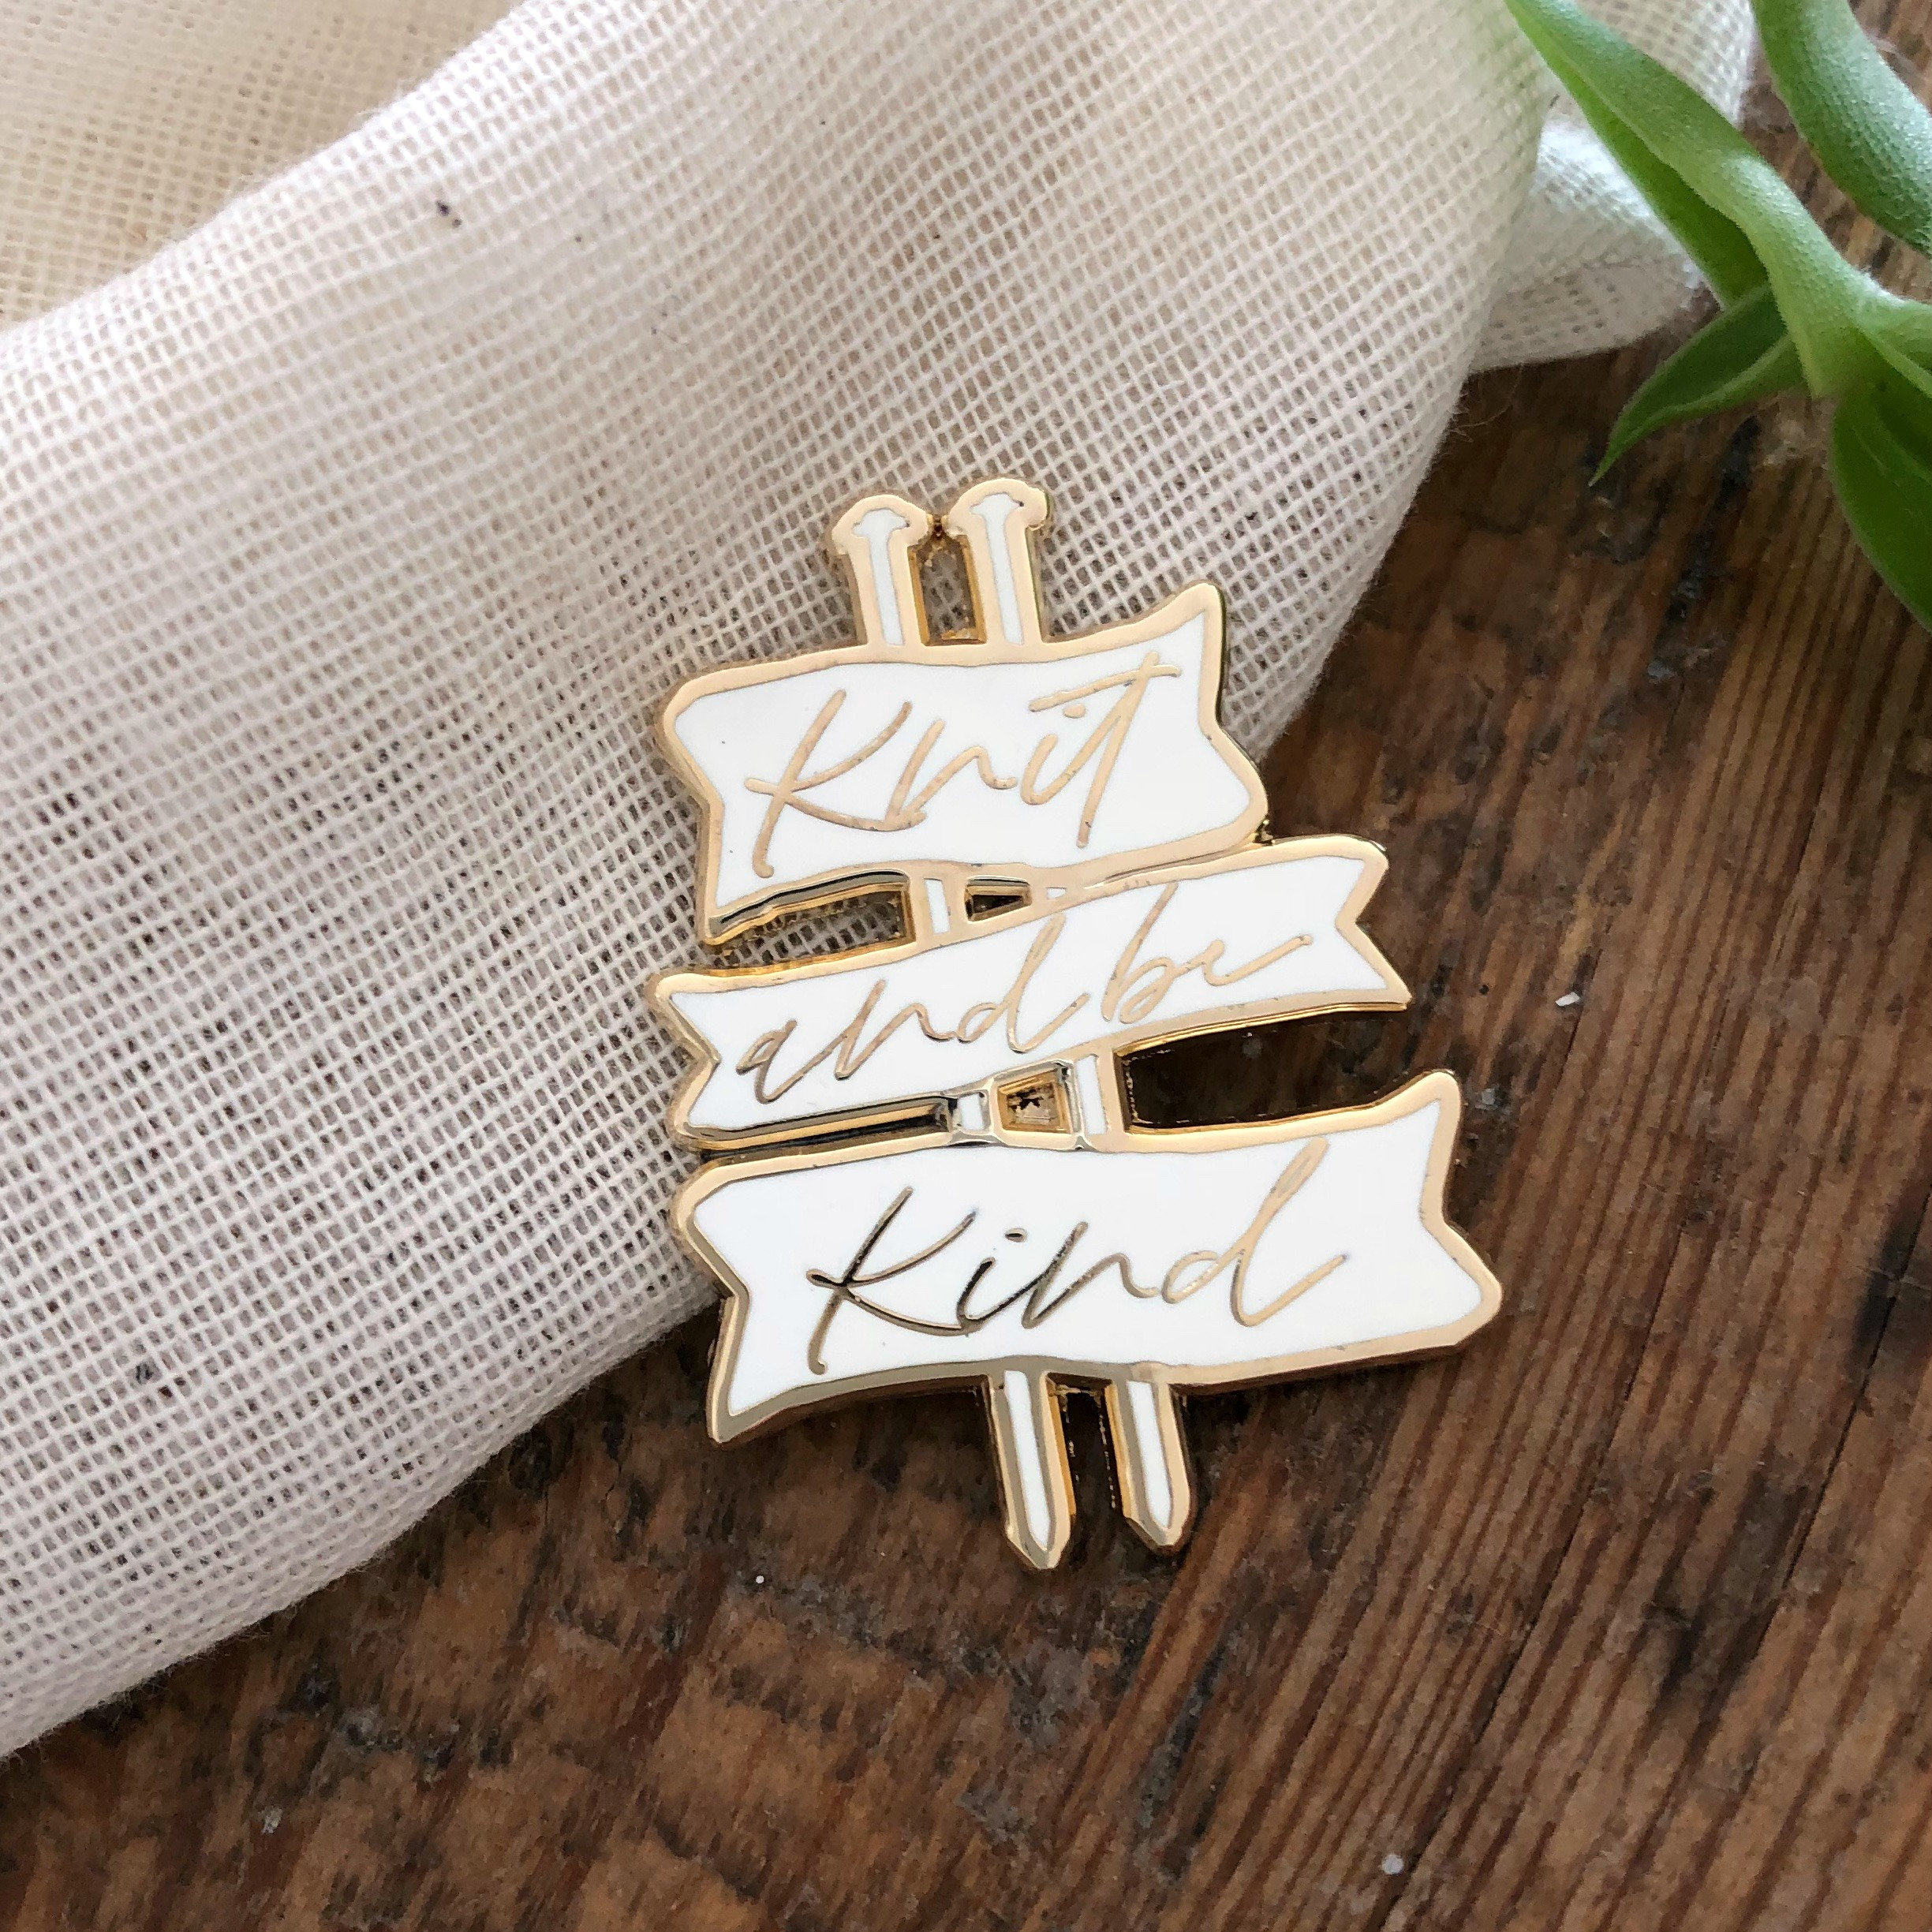 White and Gold Pin Cute Knitting Gift Knit and be Kind Uplifting Gift Knitting Enamel Pin